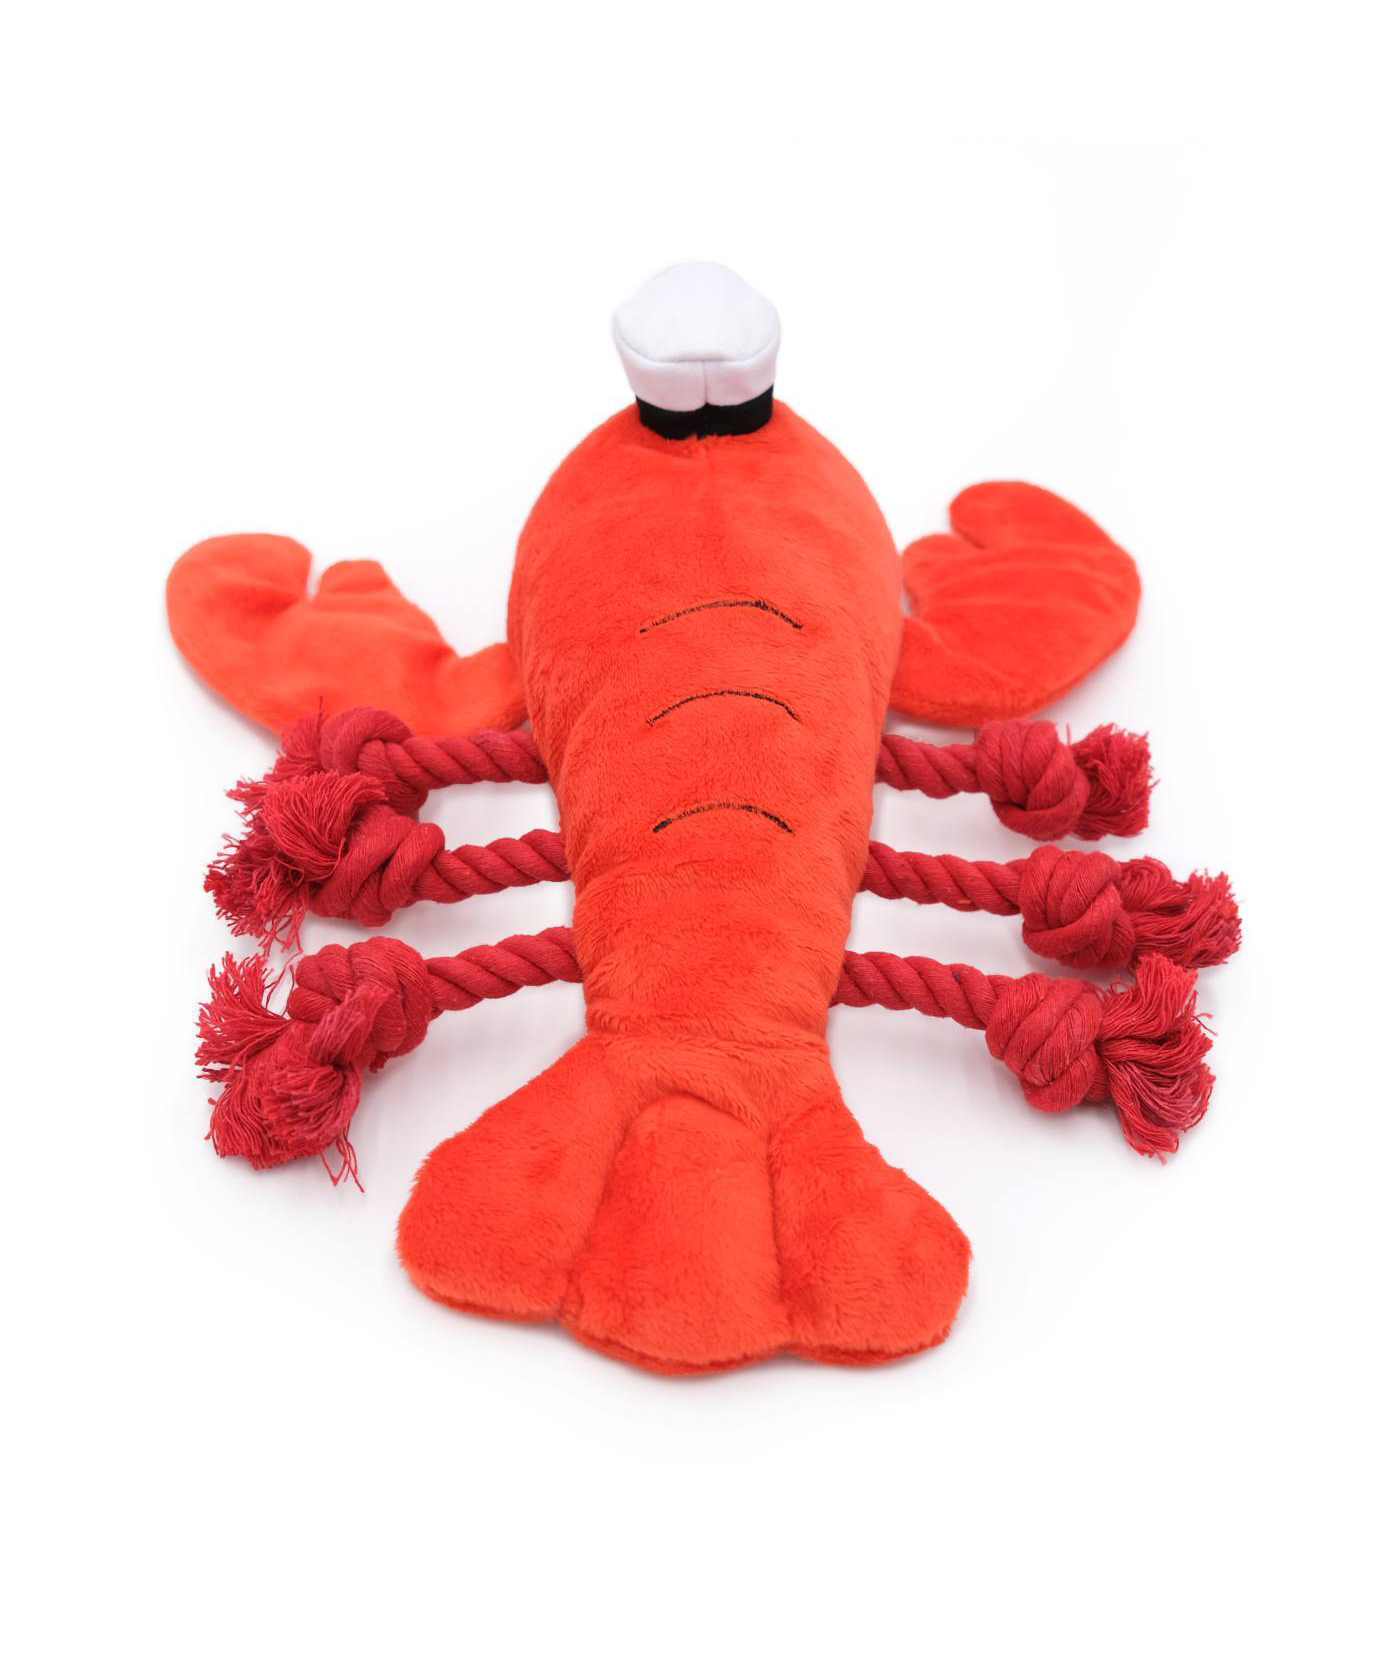 Playful Pal Plush Squeaker Rope Dog Toy - Luca the Lobster